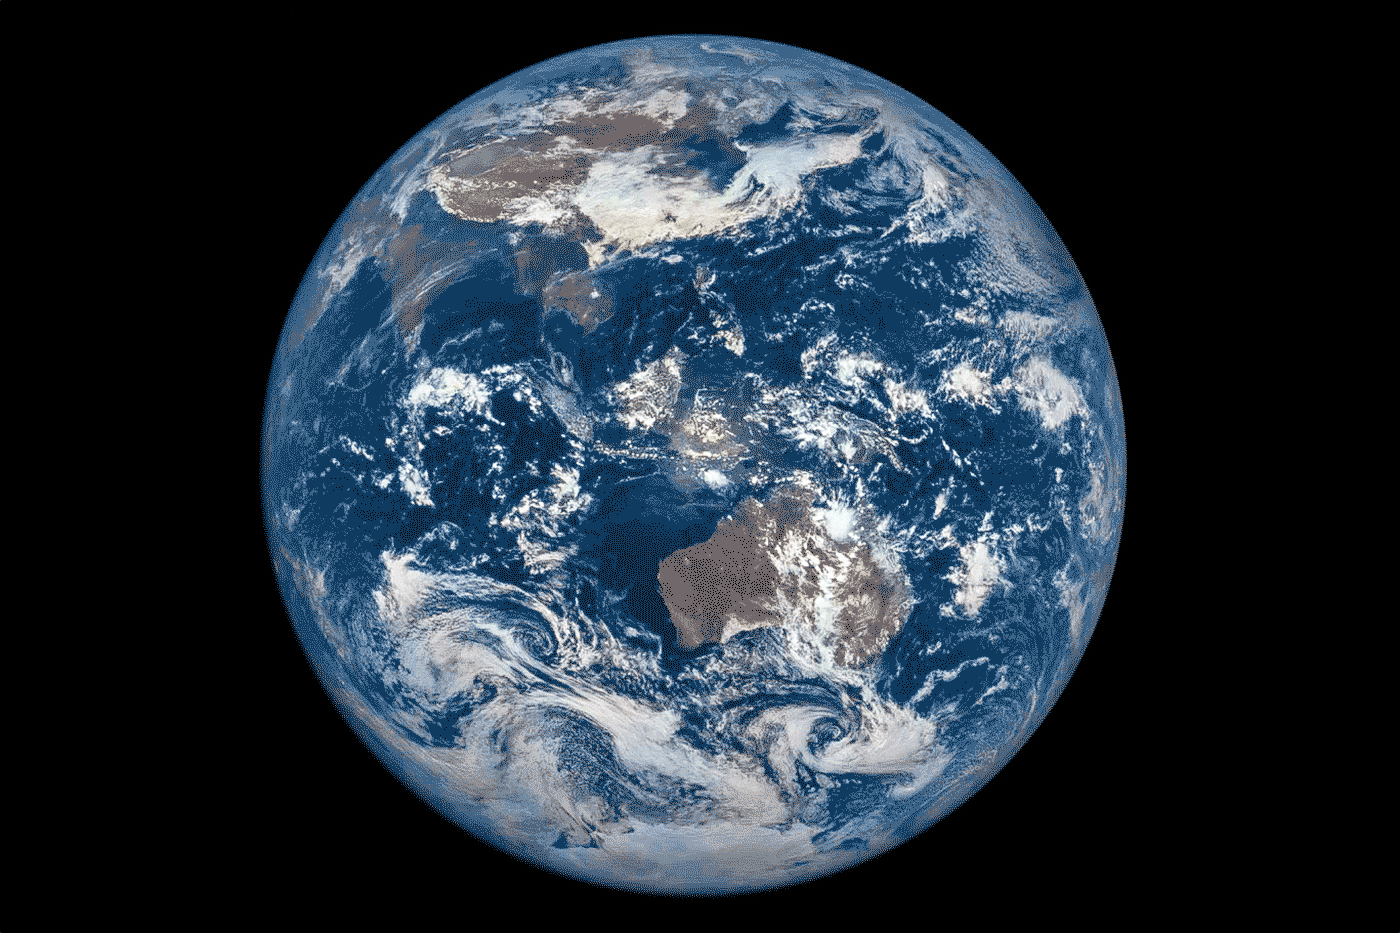 DSCOVR films a different view of the total solar eclipse